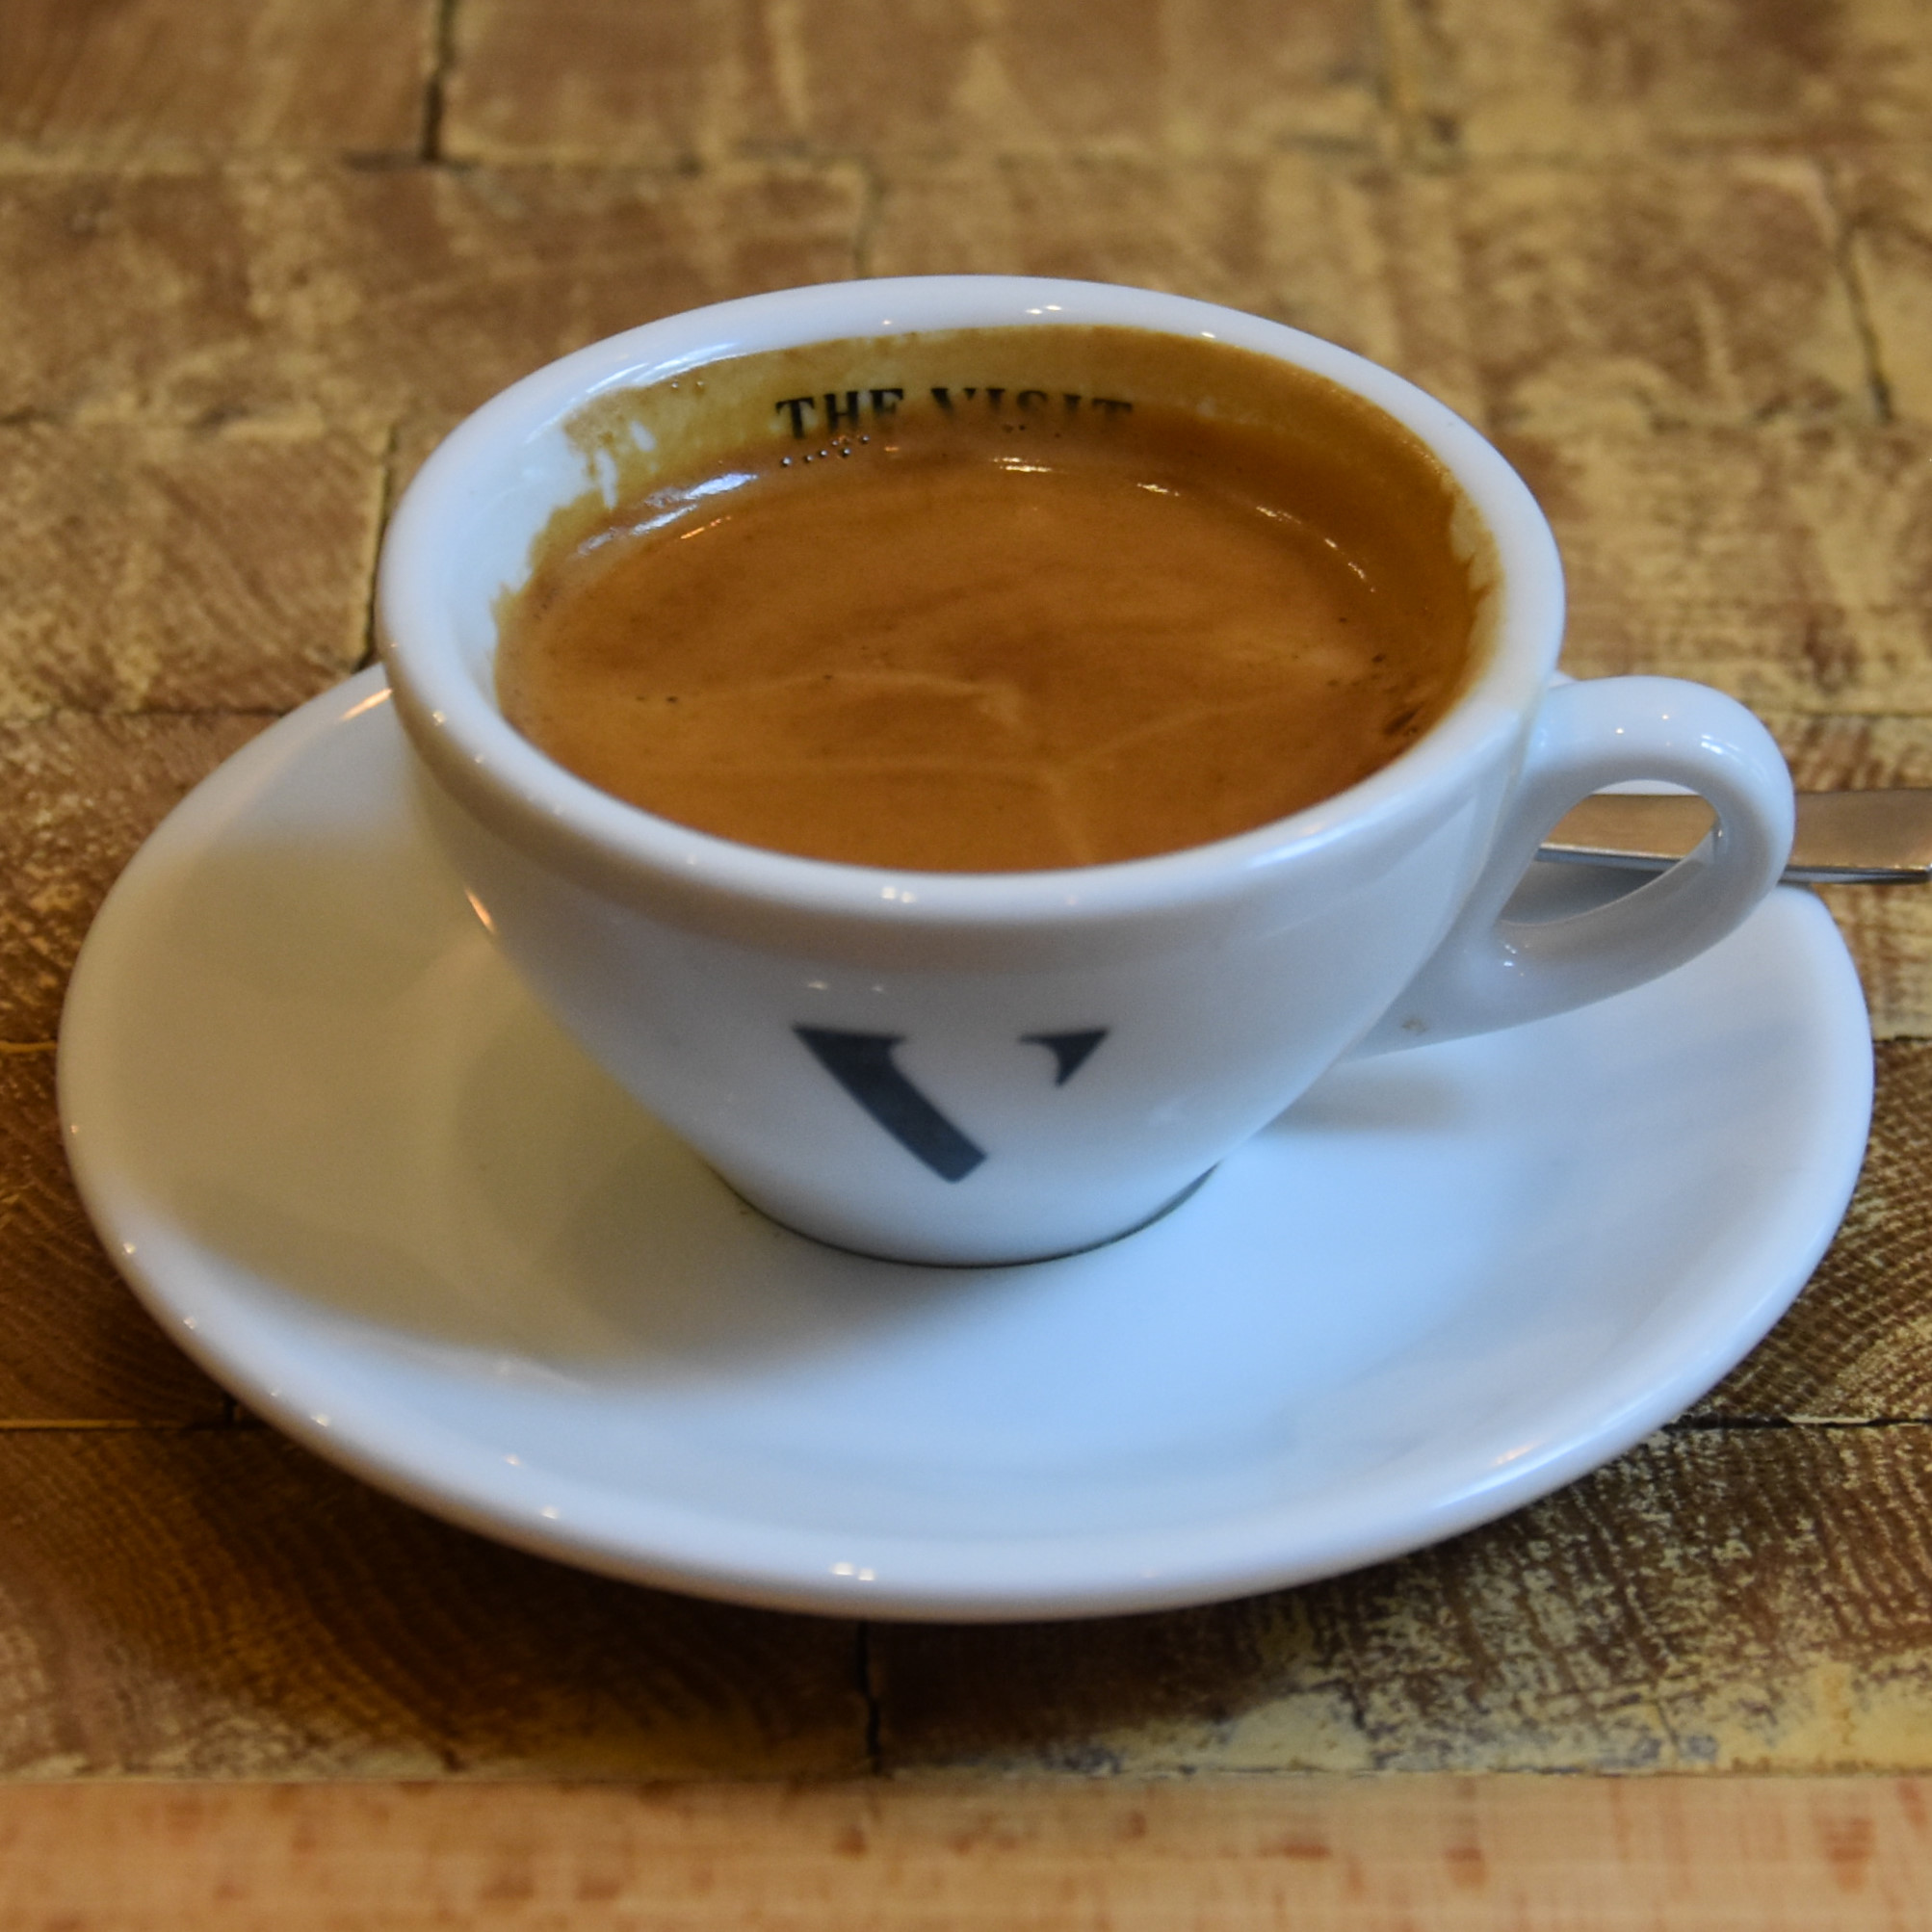 A espresso in a wide-brimmed white cup with a V on the front (for The Visit).